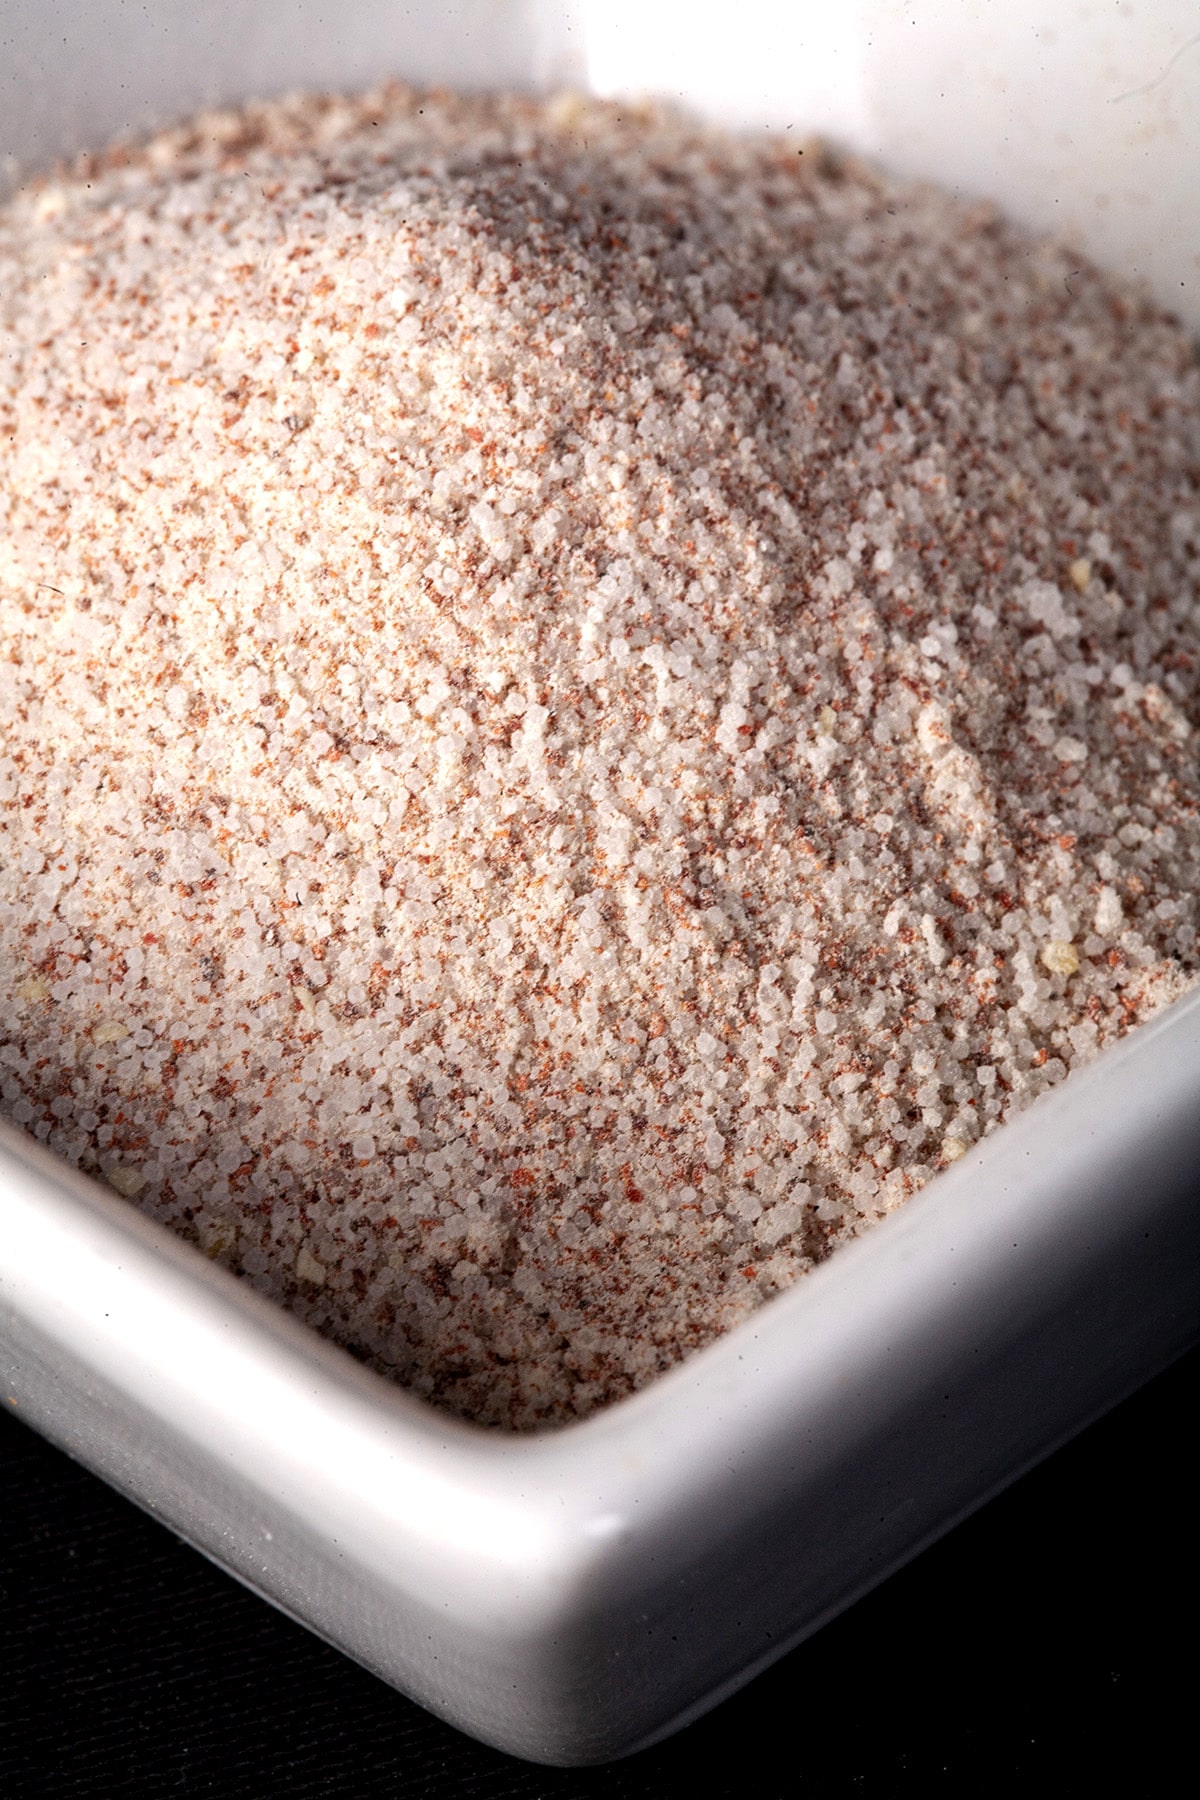 A small, square shaped white bowl with a pinkish seasoning salt mixture in it.